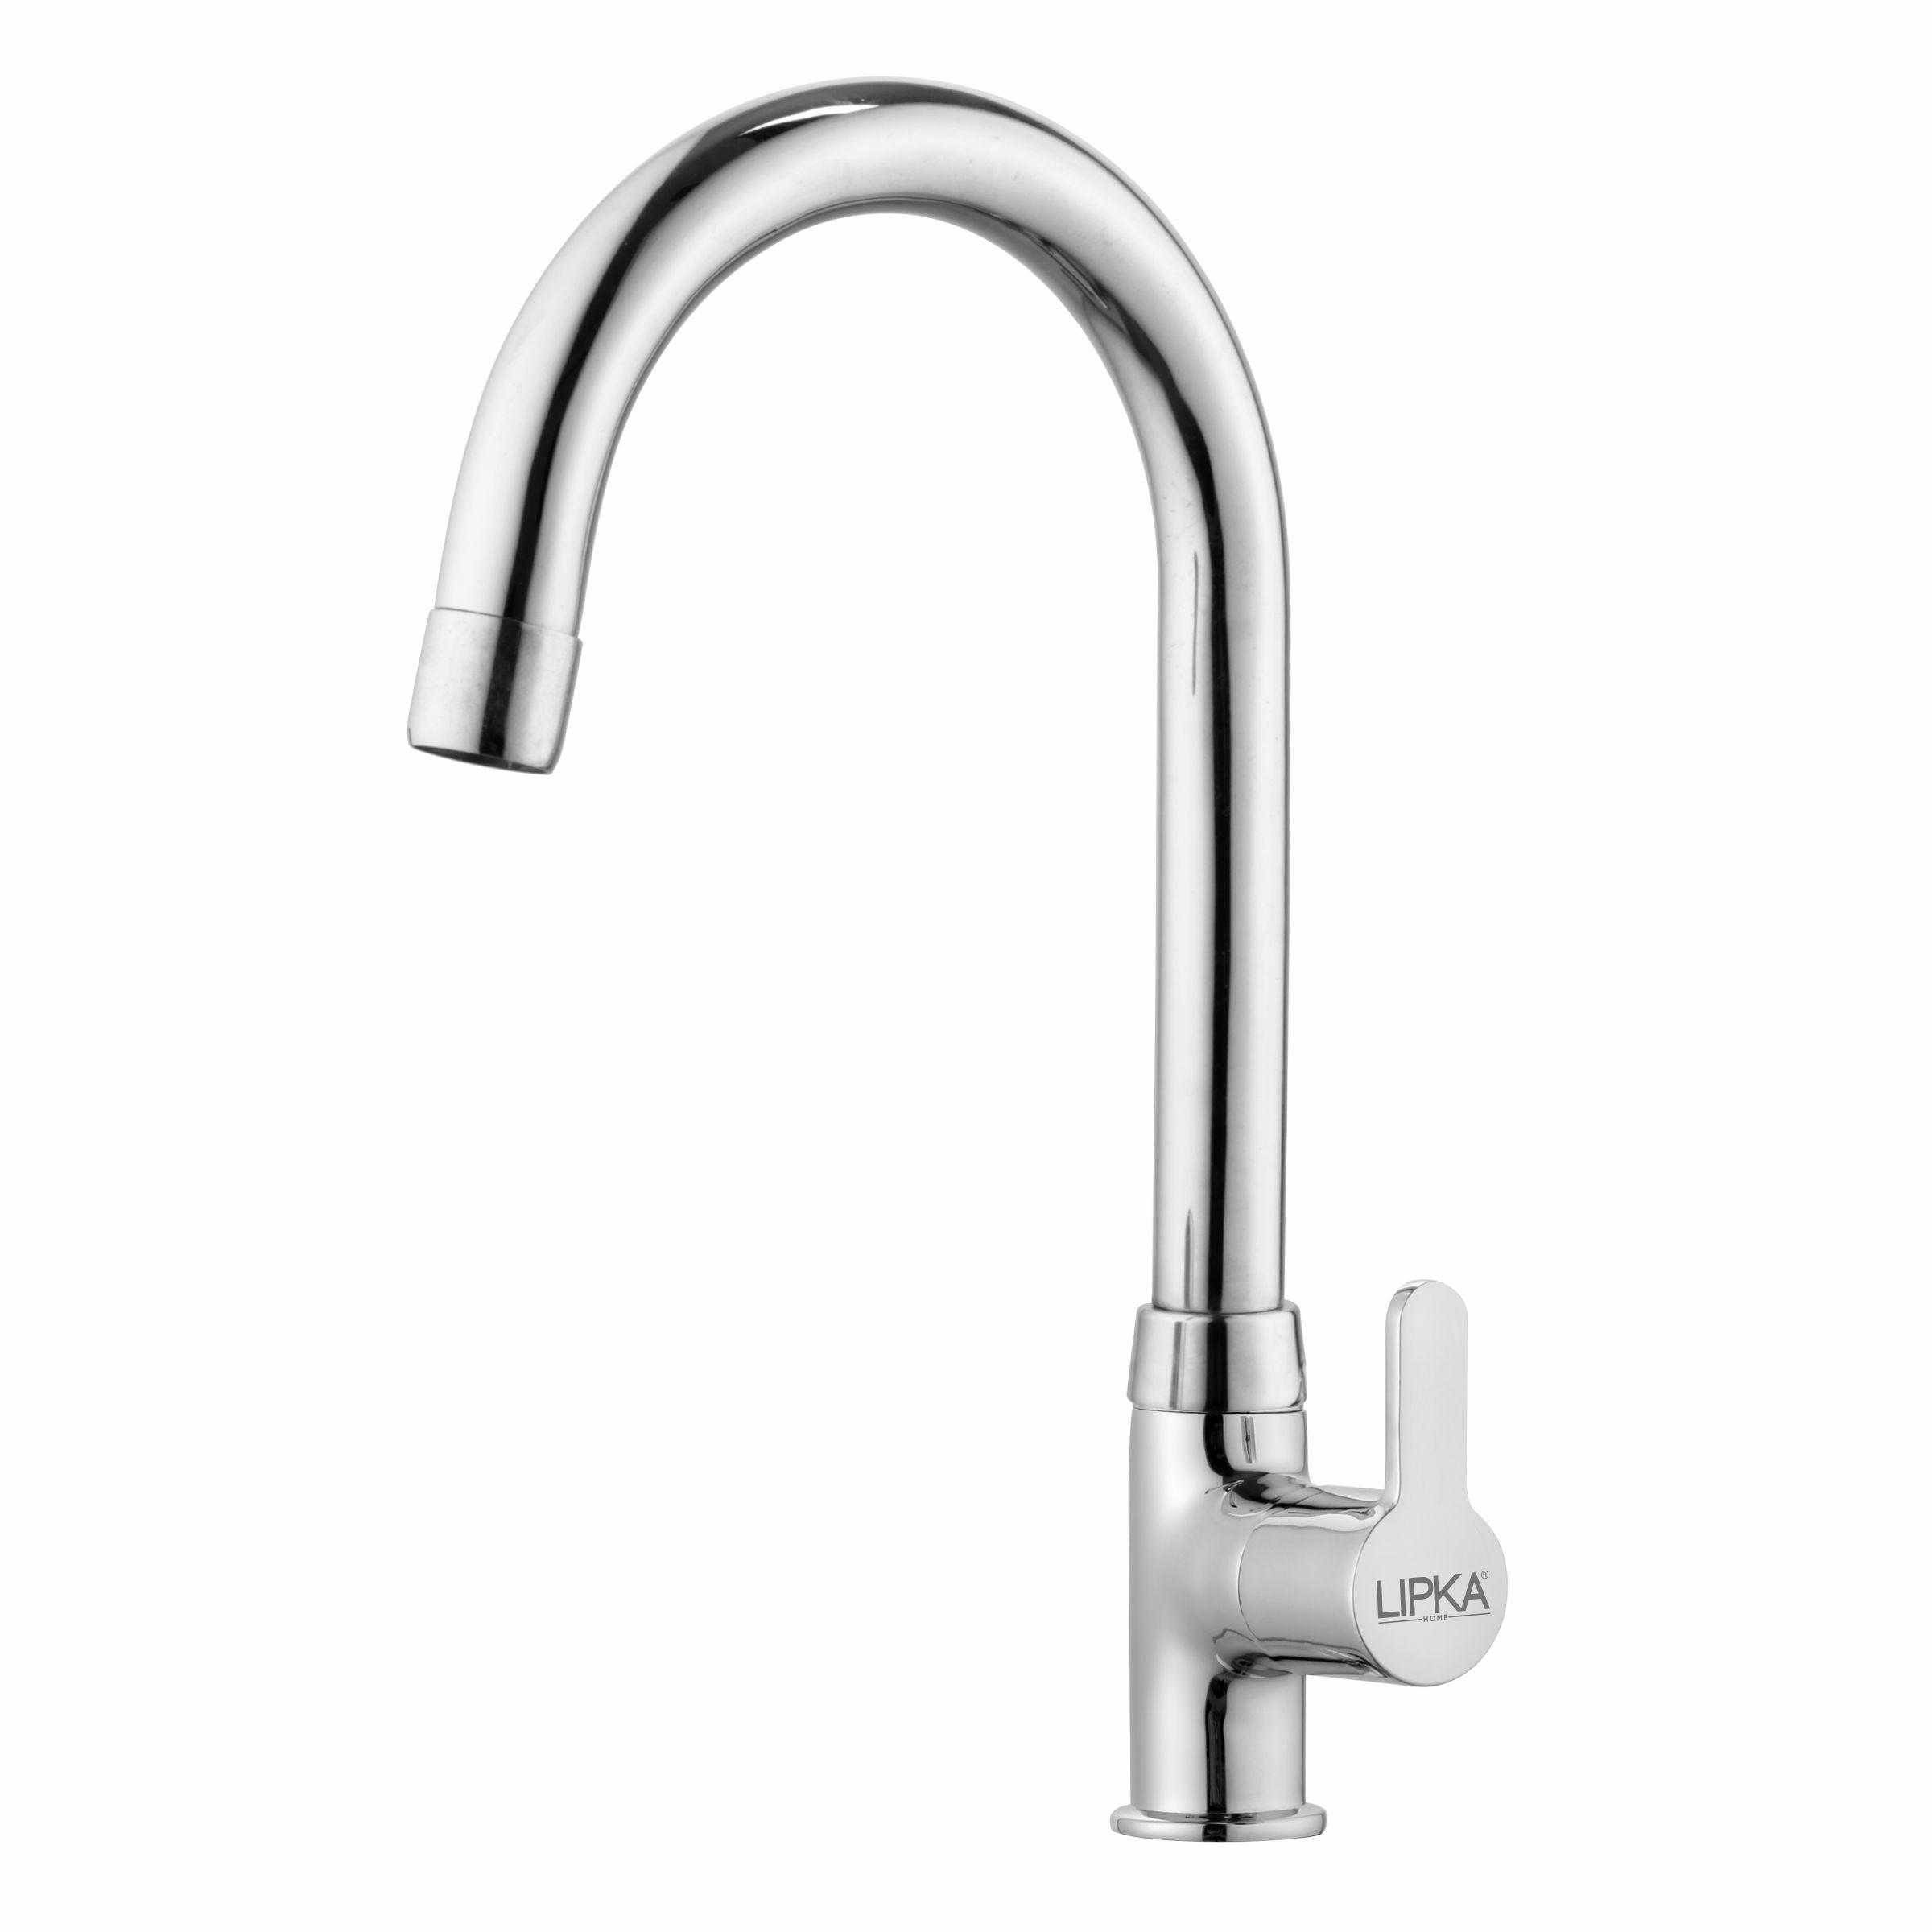 Fusion Swan Neck Brass Faucet with Round Swivel Spout (15 Inches) - LIPKA - Lipka Home